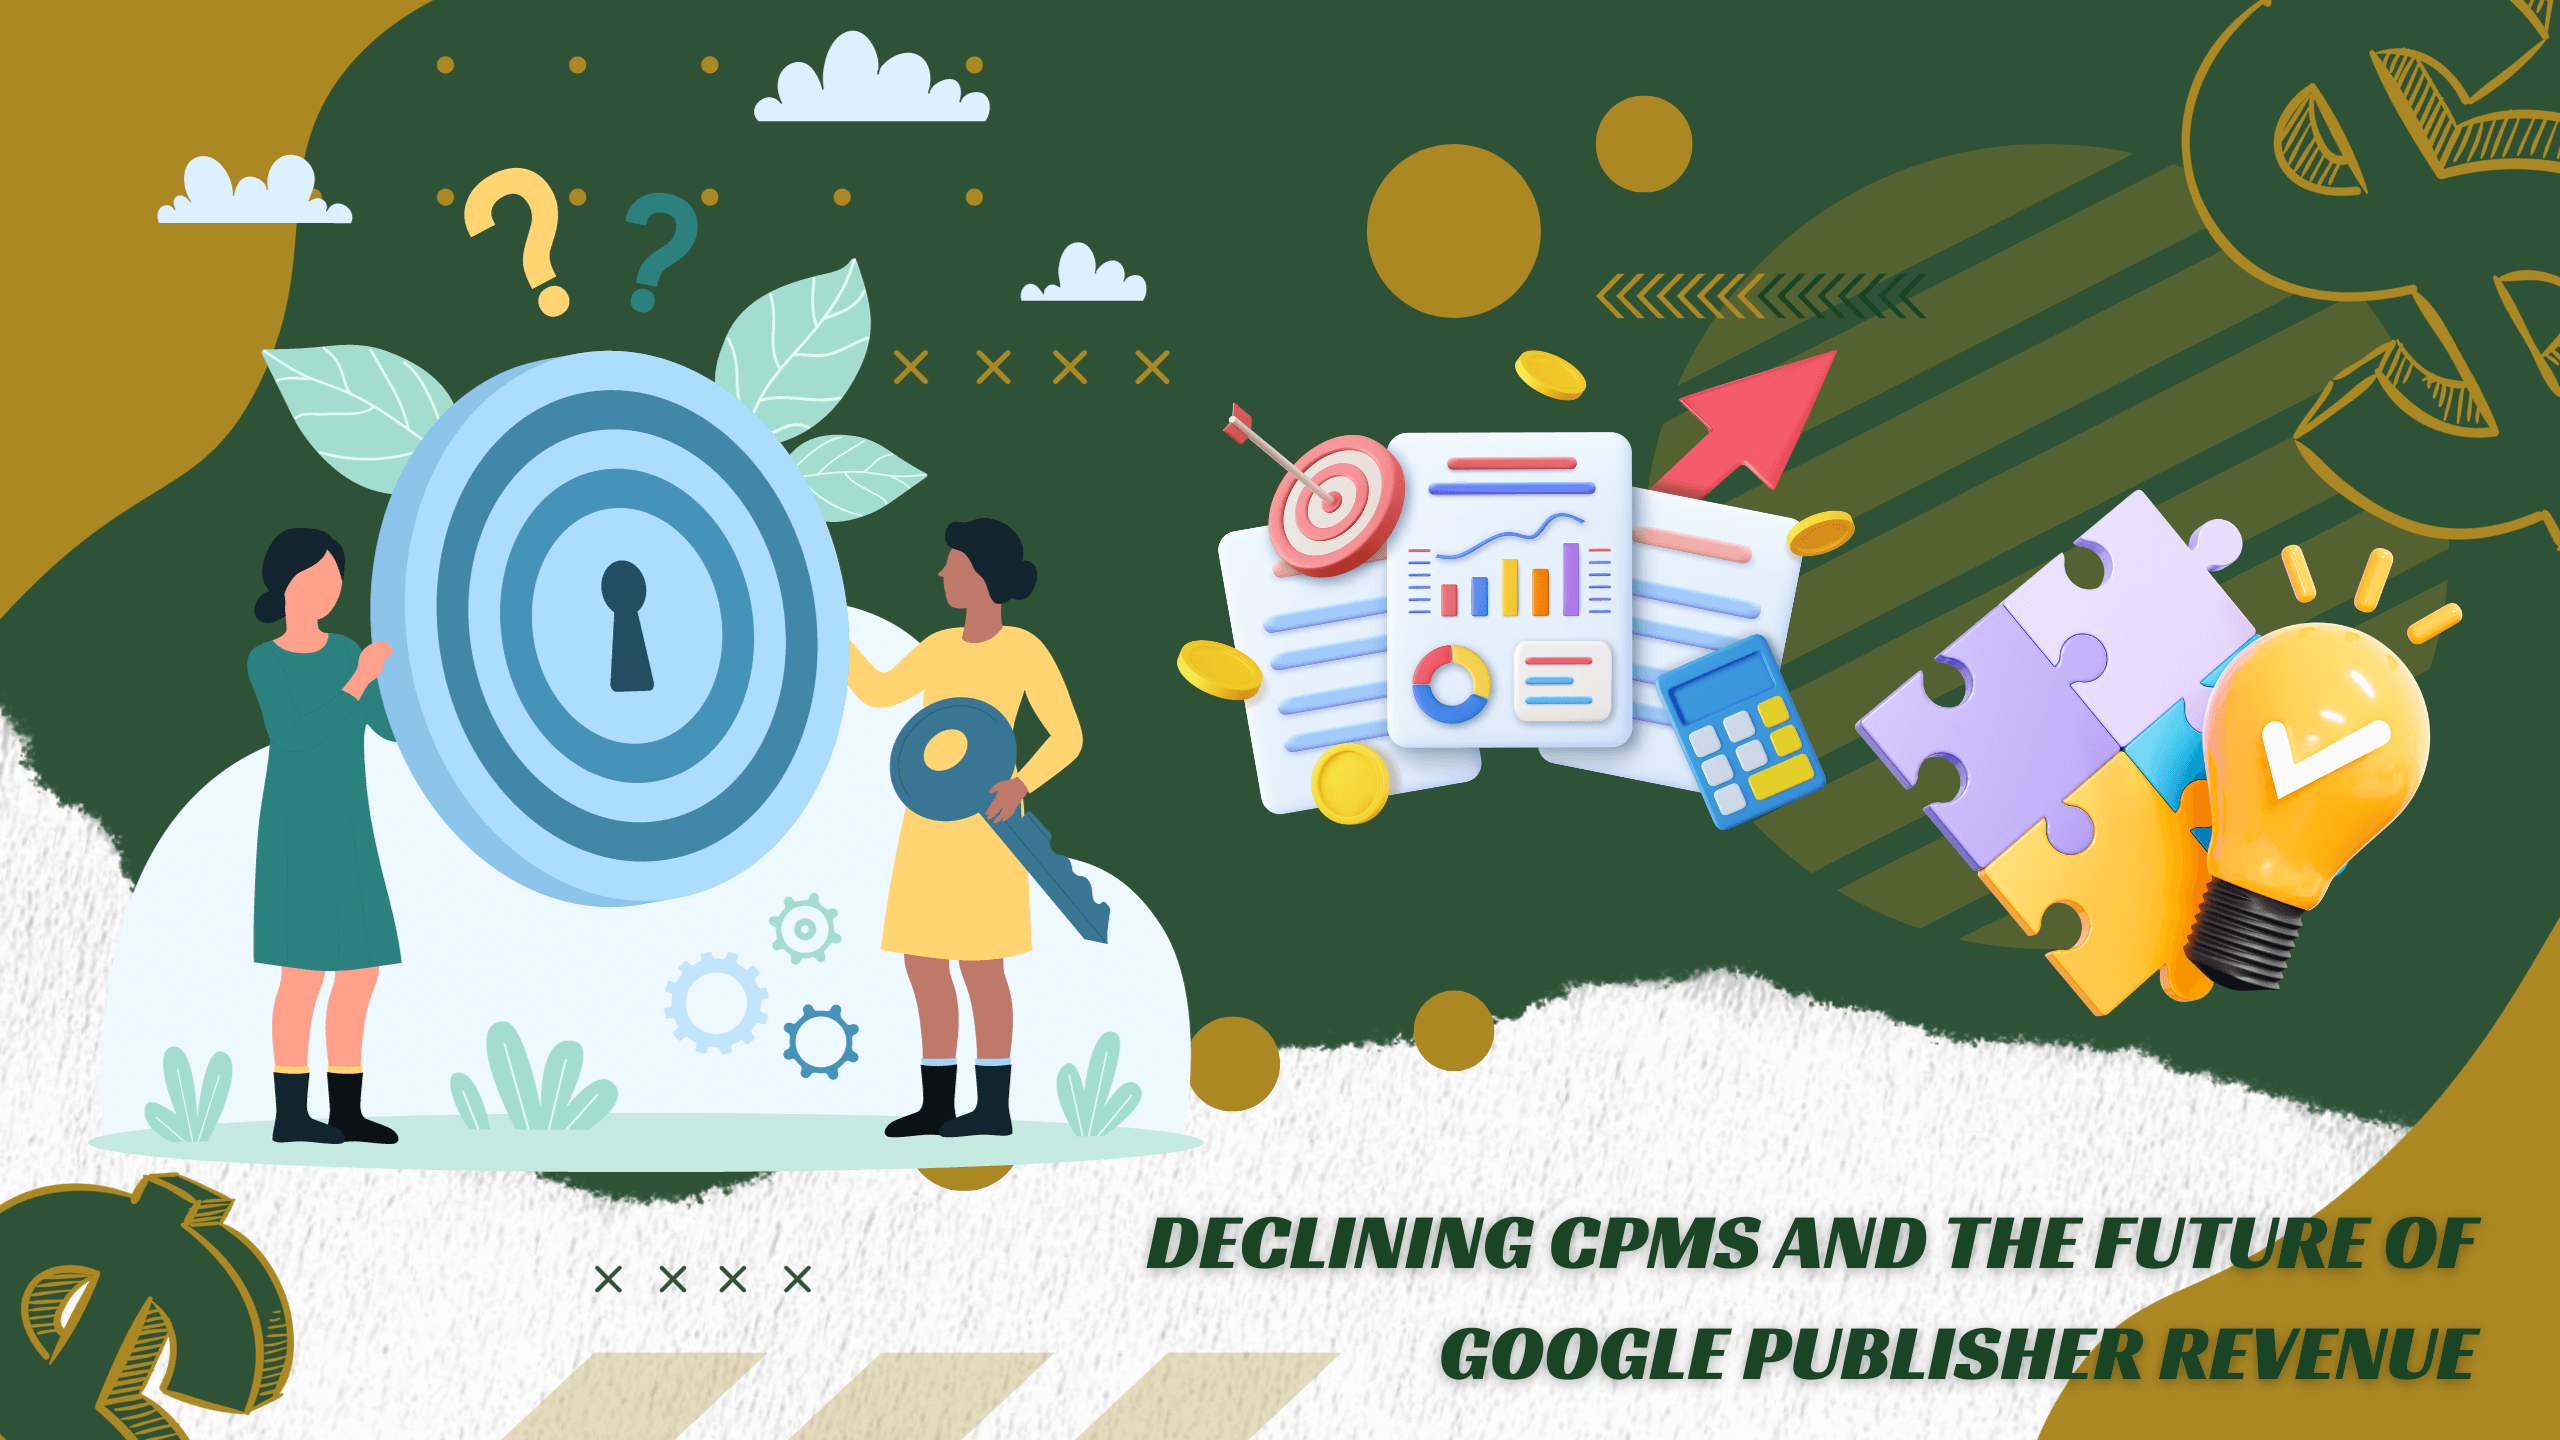 Declining CPMs and the Future of Google Publisher Revenue